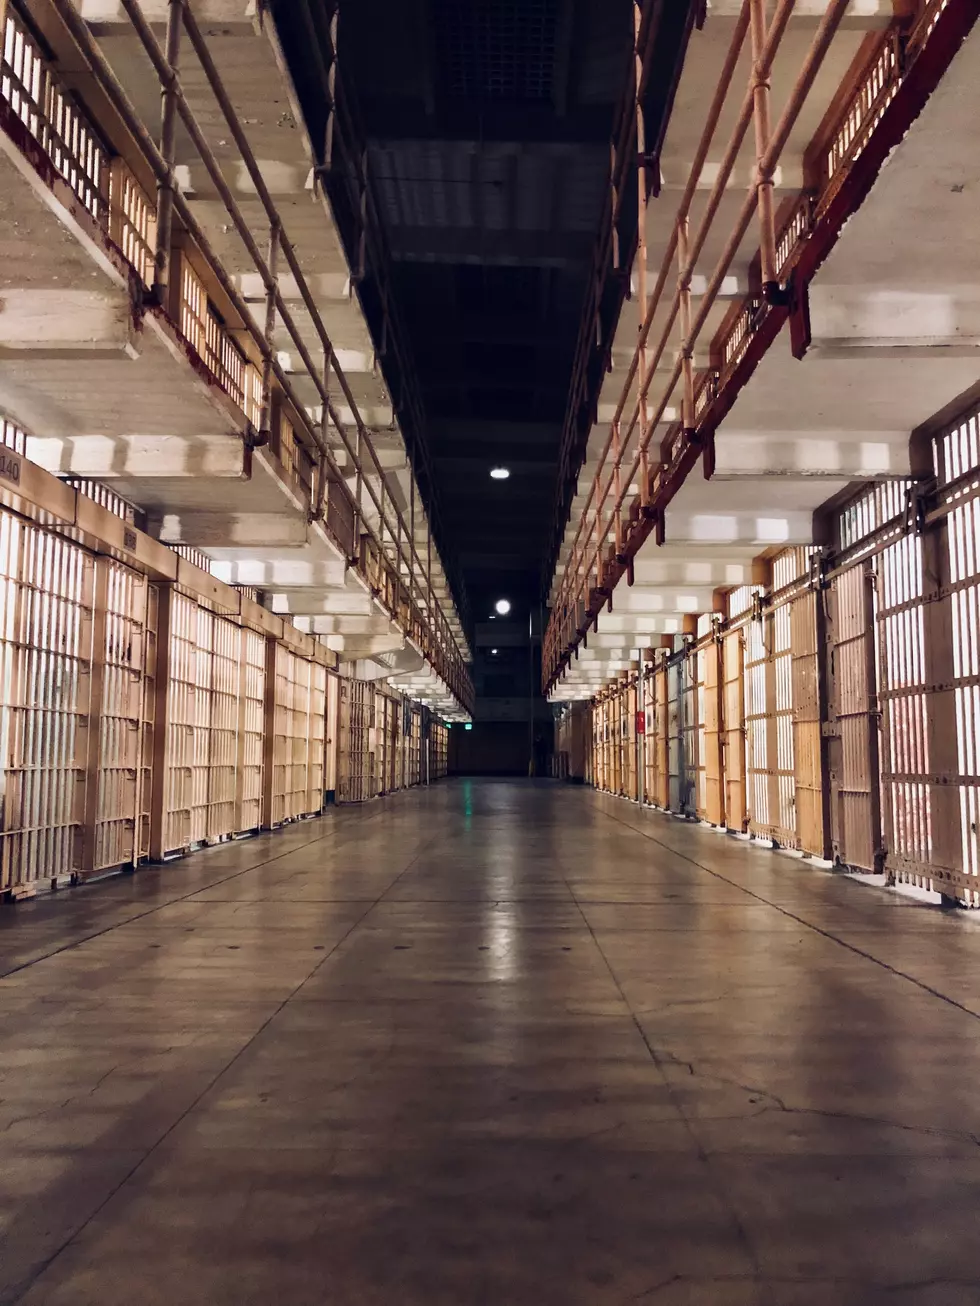 The Hidden Truth: Study Reveals Trends In Washington State Prison Deaths